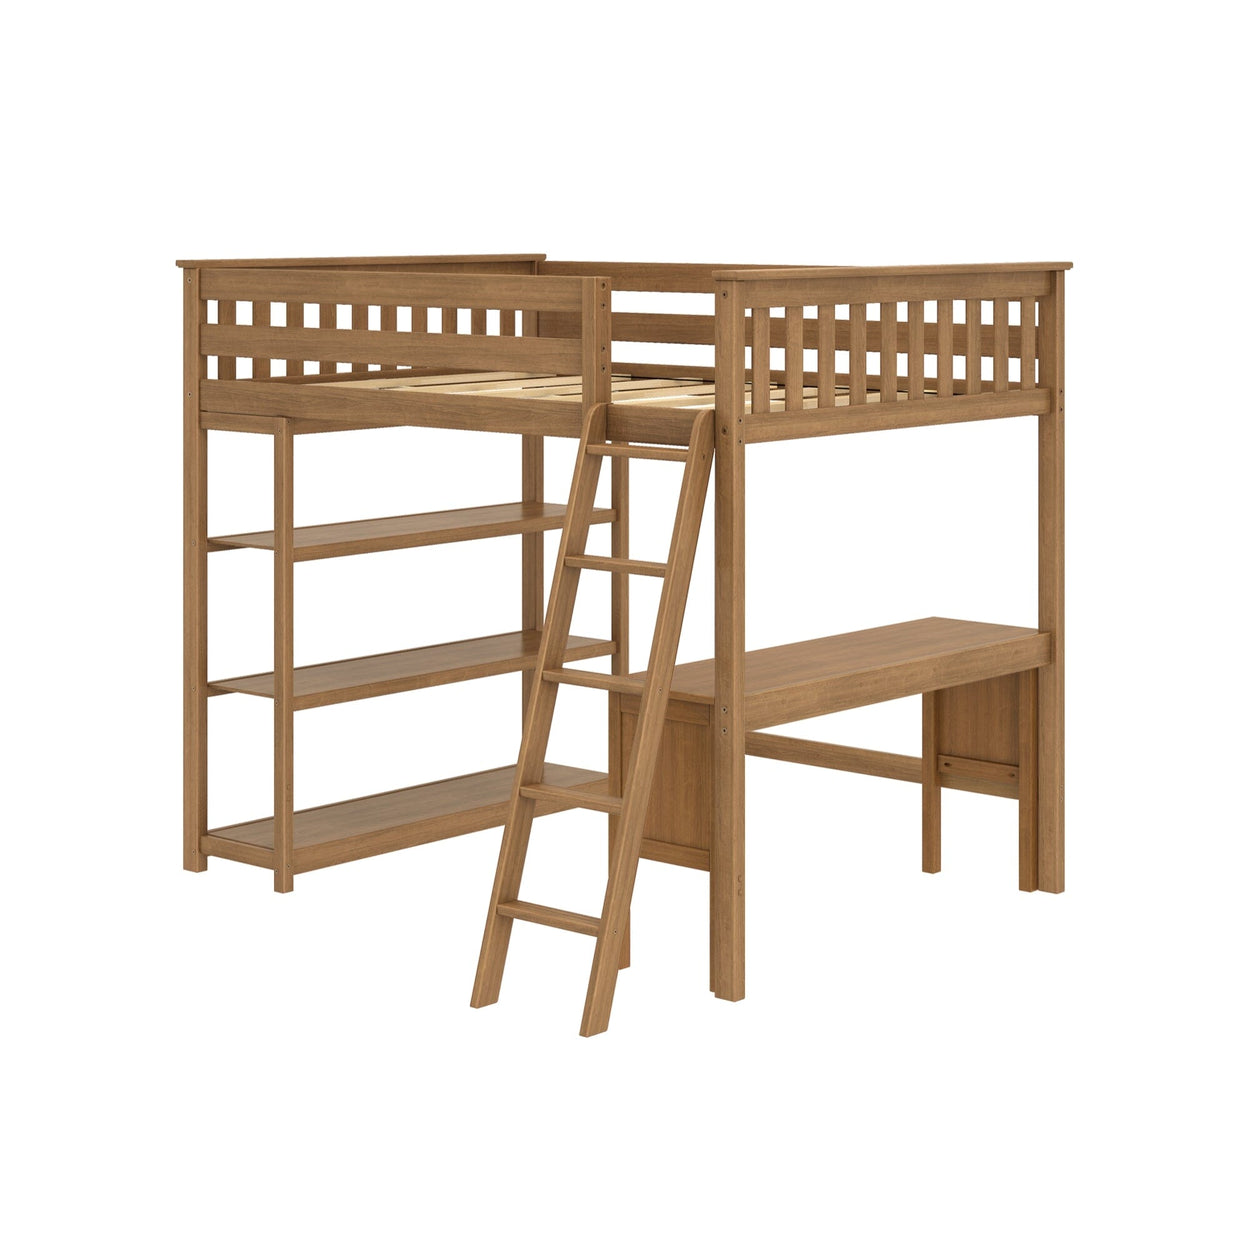 185248-007 : Storage & Study Loft Beds Full-Size High Loft Bed with Bookcase and Desk, Pecan